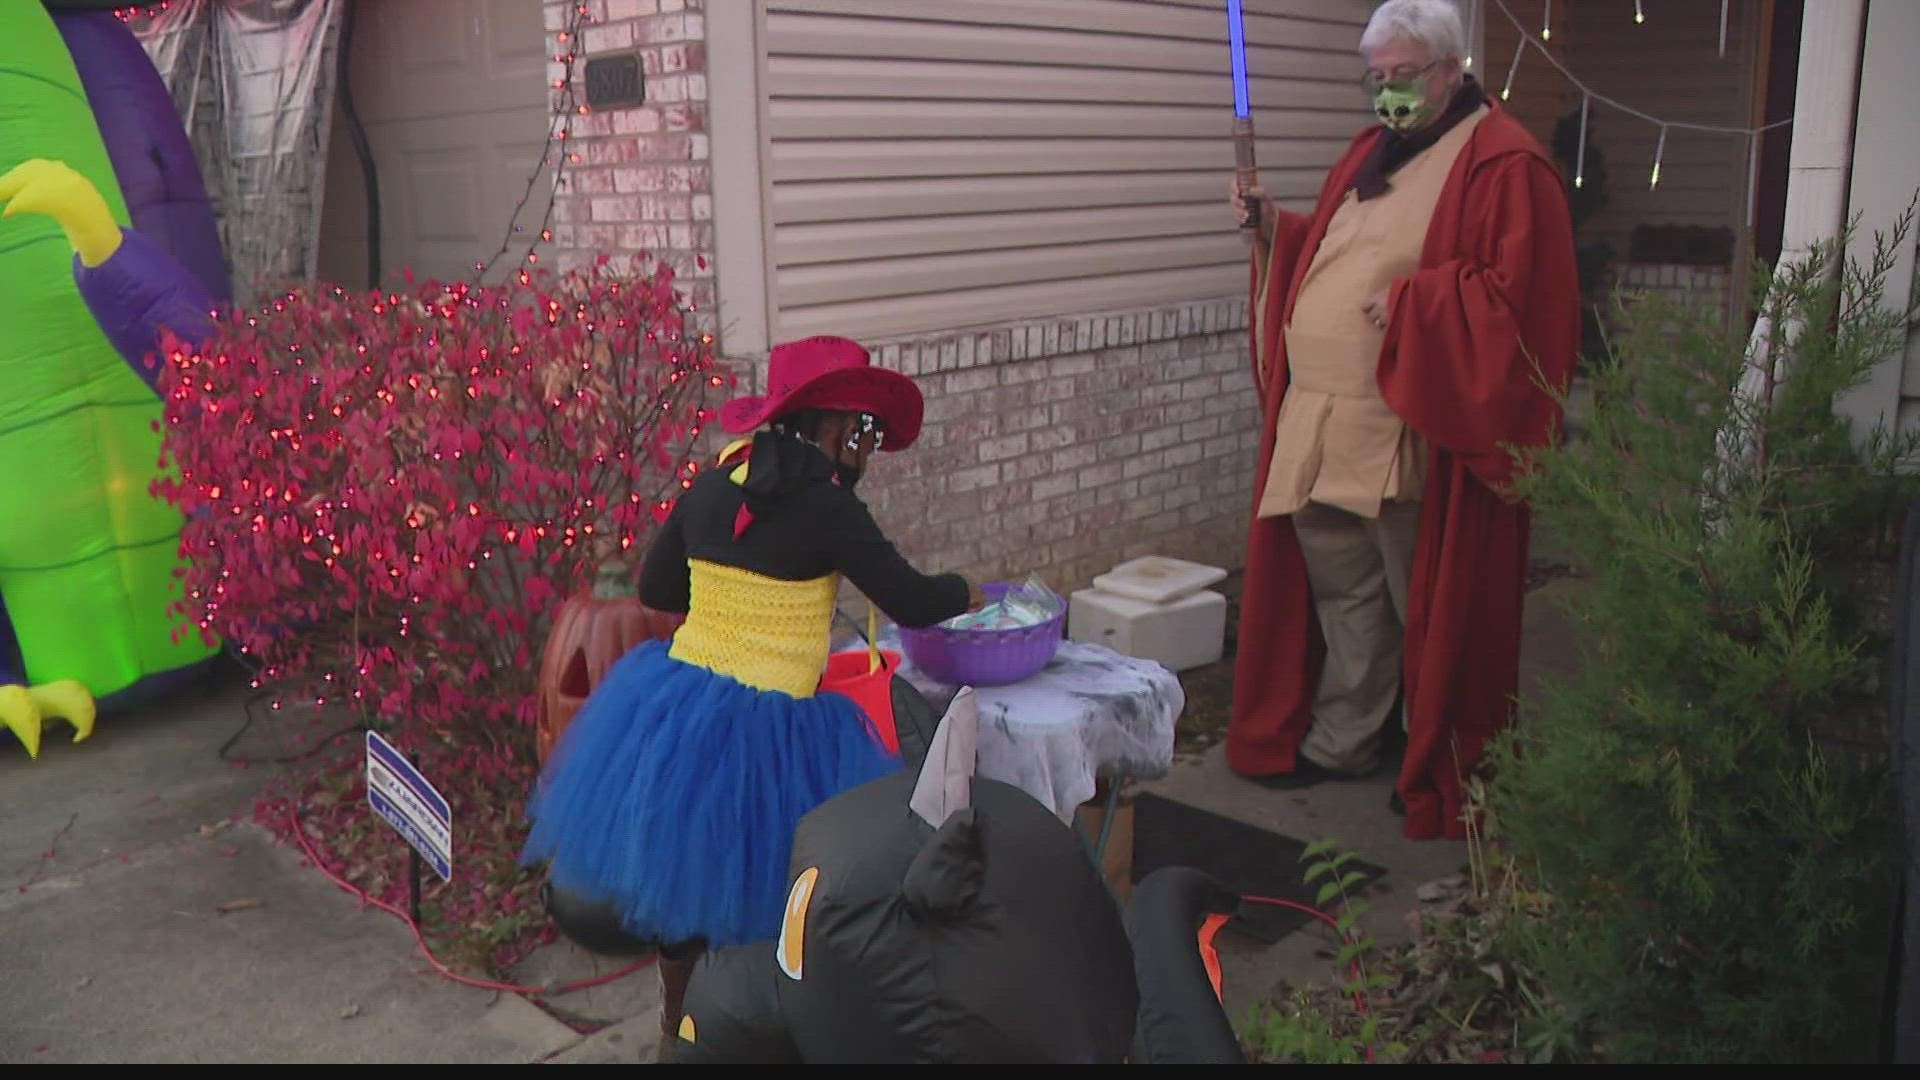 Coming up with a killer costume for Halloween doesn't have to break the bank. Cherie Lowe's advice is start at home.